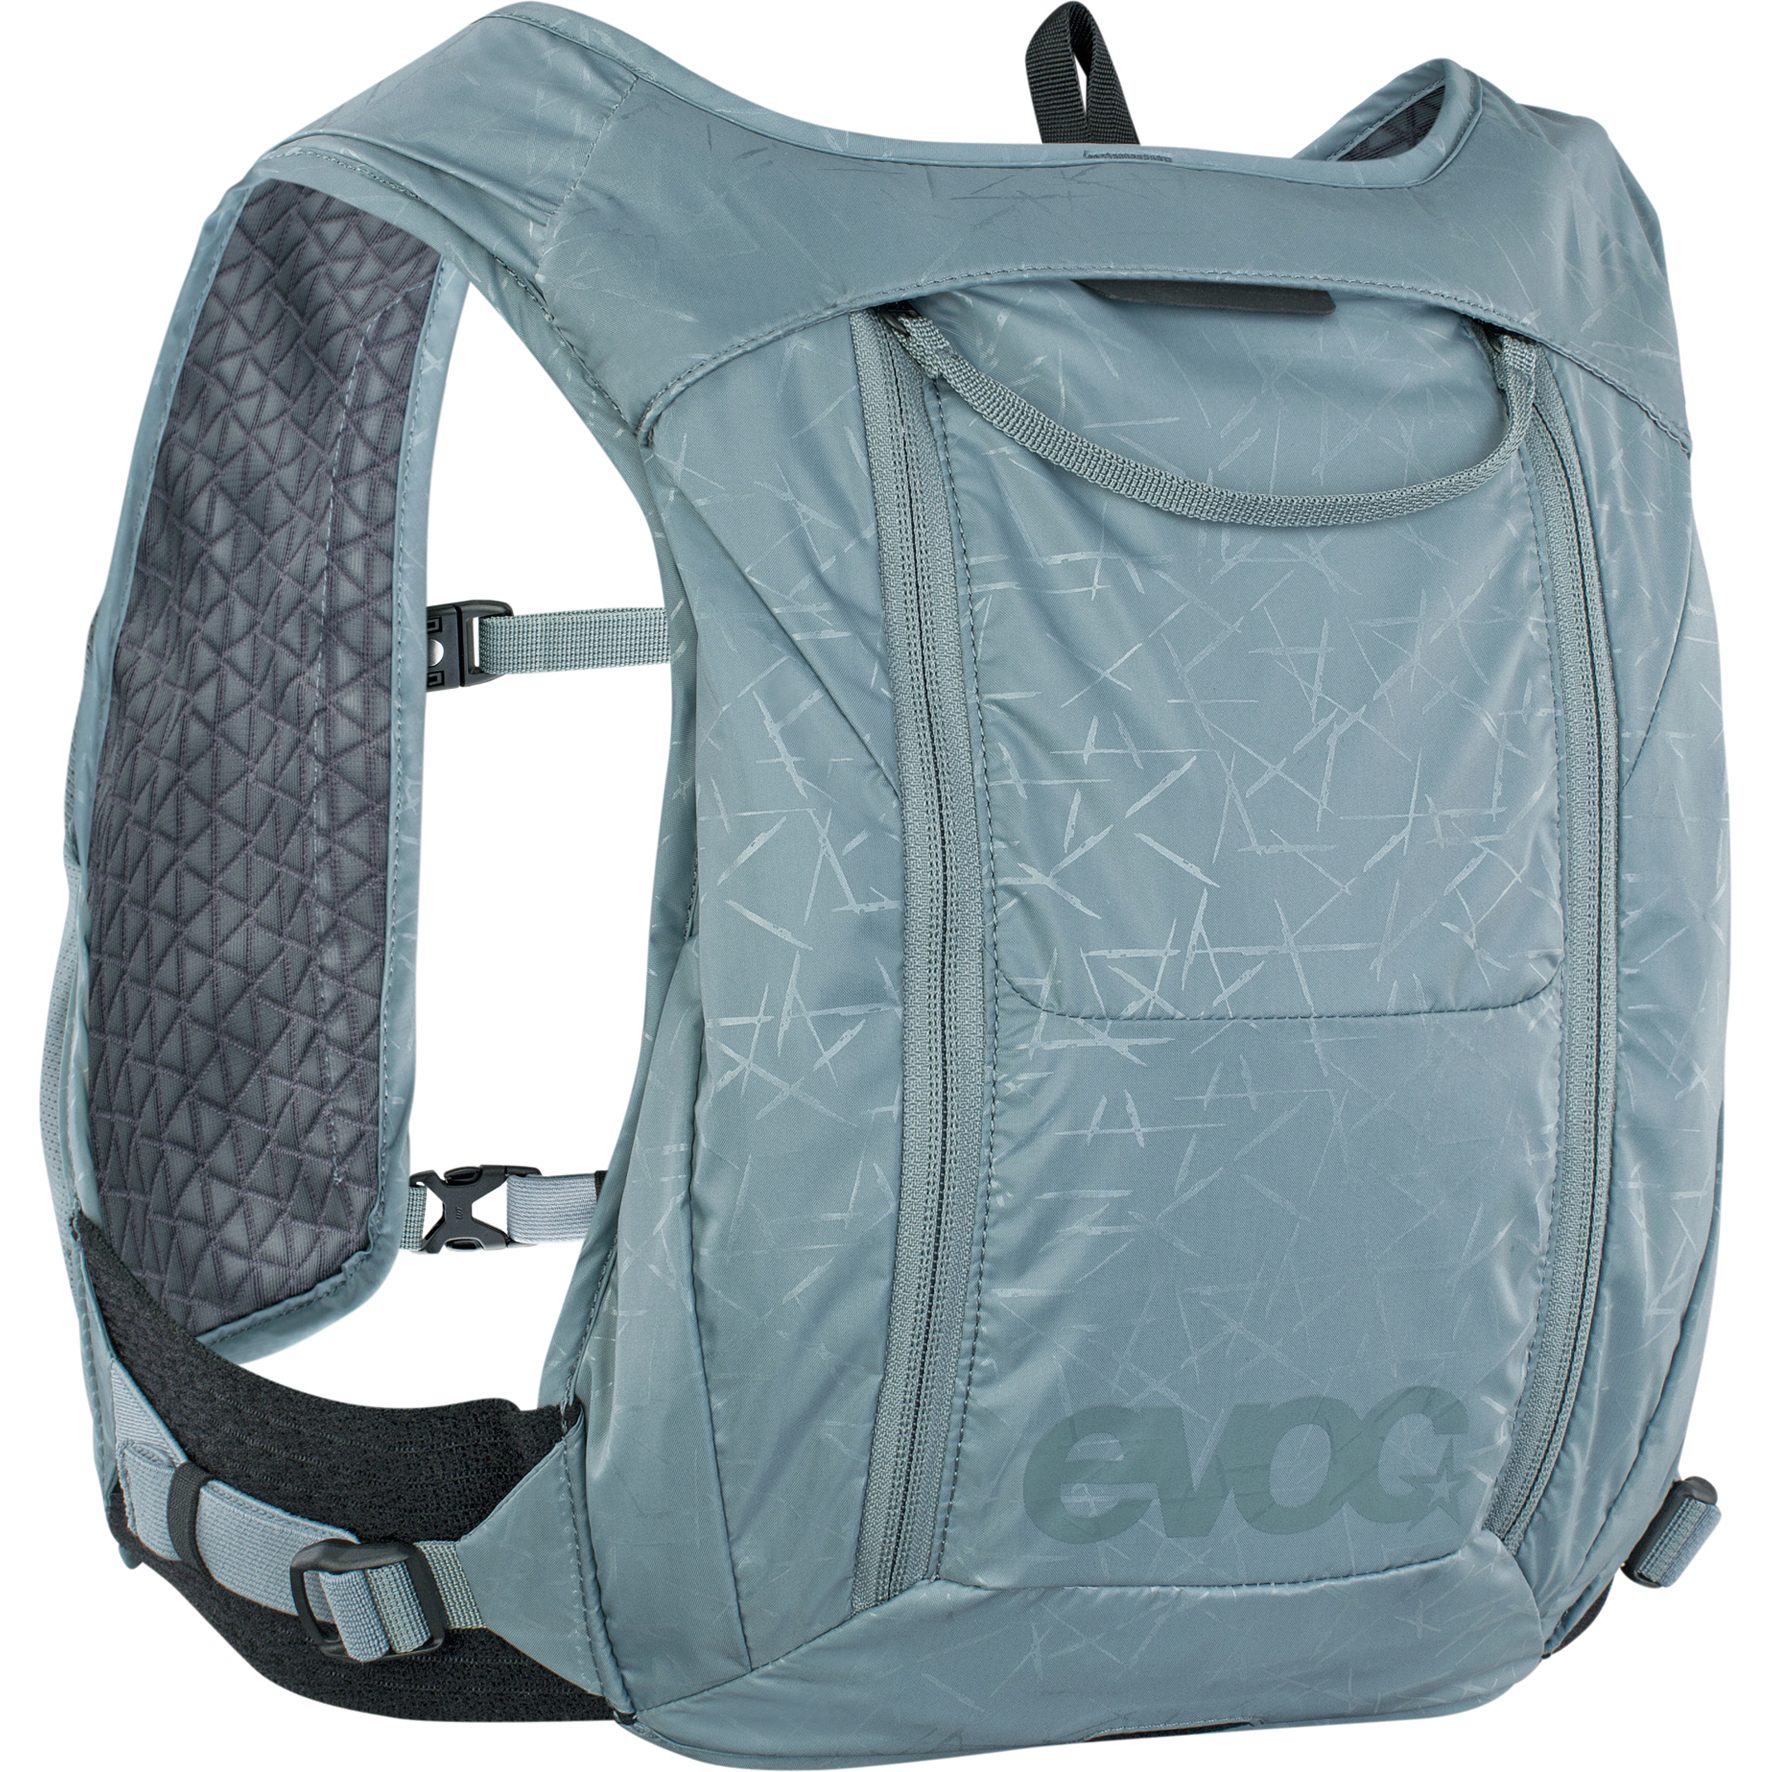 Picture of EVOC Hydro Pro 3L Backpack + 1.5L Hydration Bladder - Steel